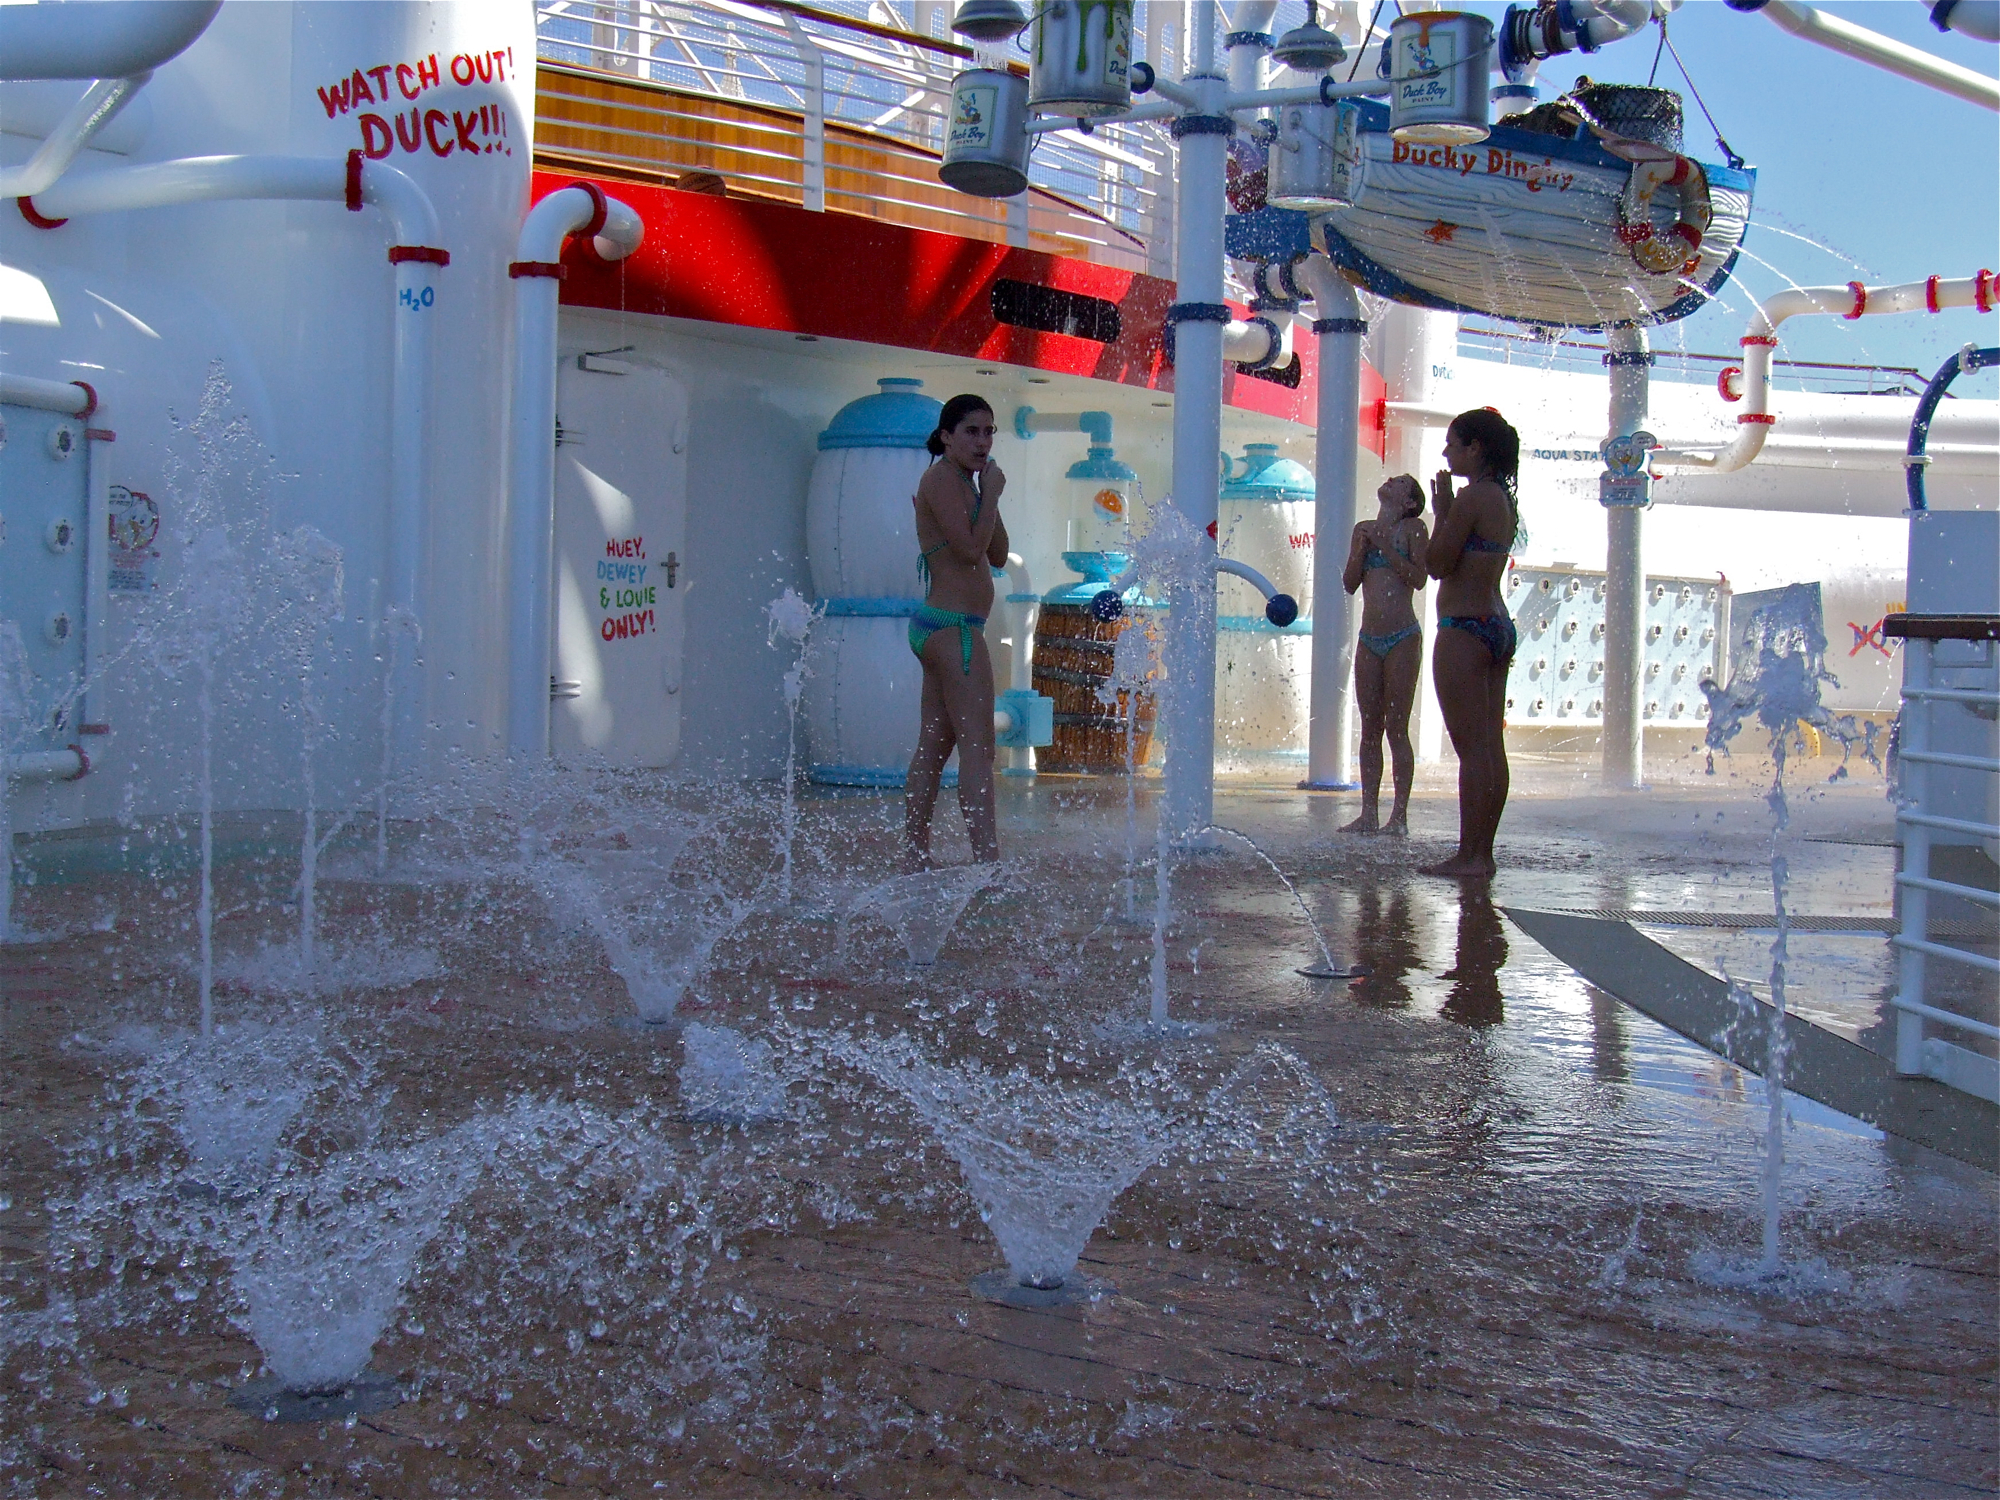 Pop Jet Fountains in AquaLab on the Disney Fantasy